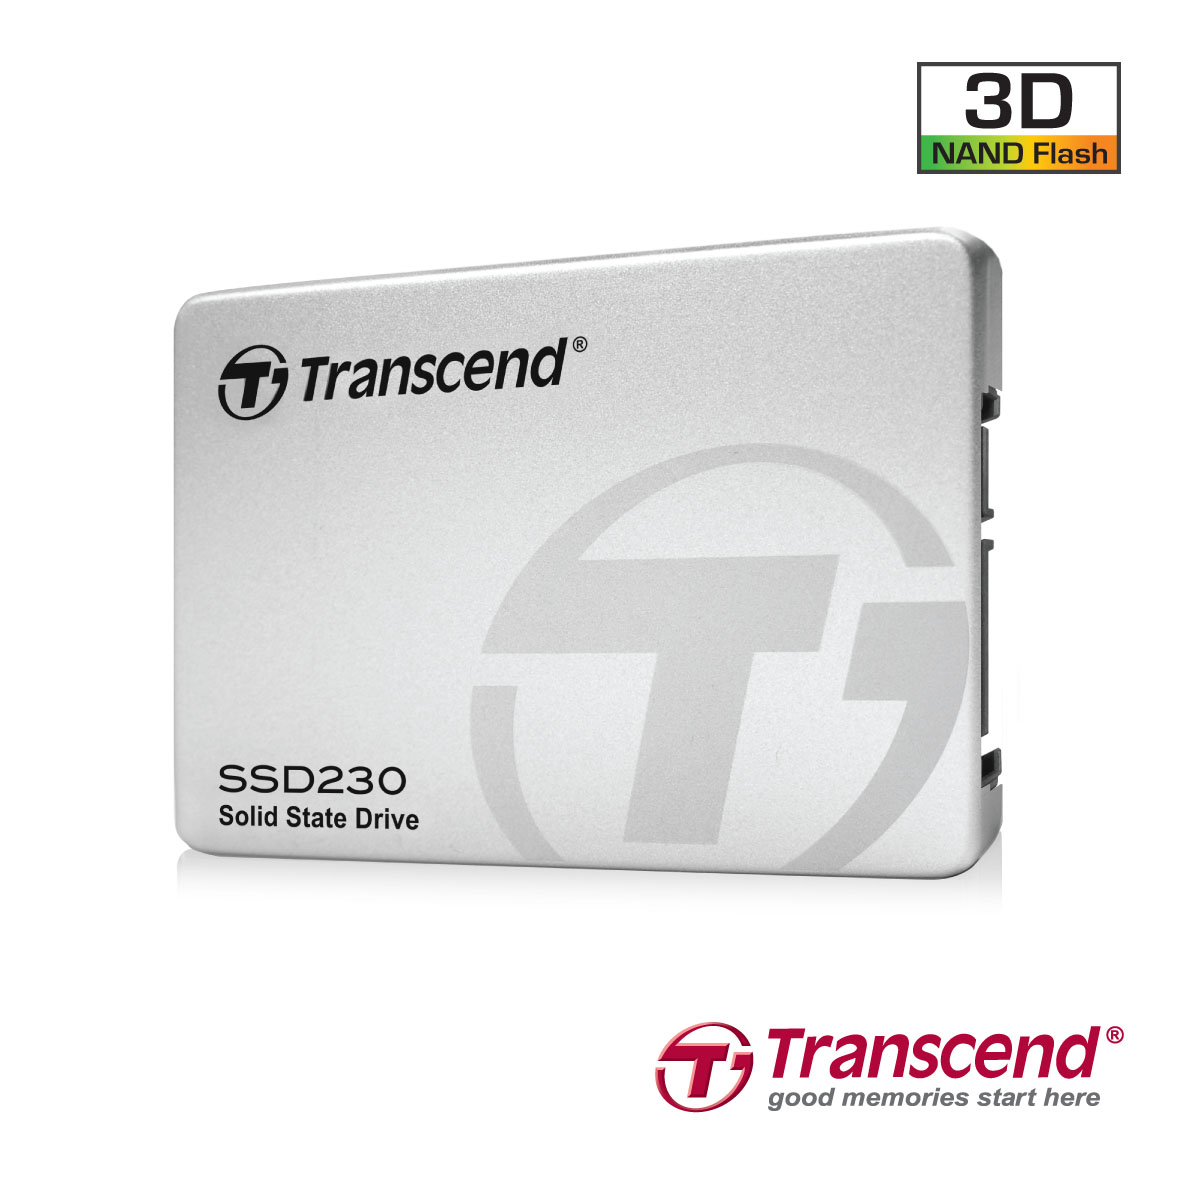 Transcend Launches SSD230 with 3D NAND Flash